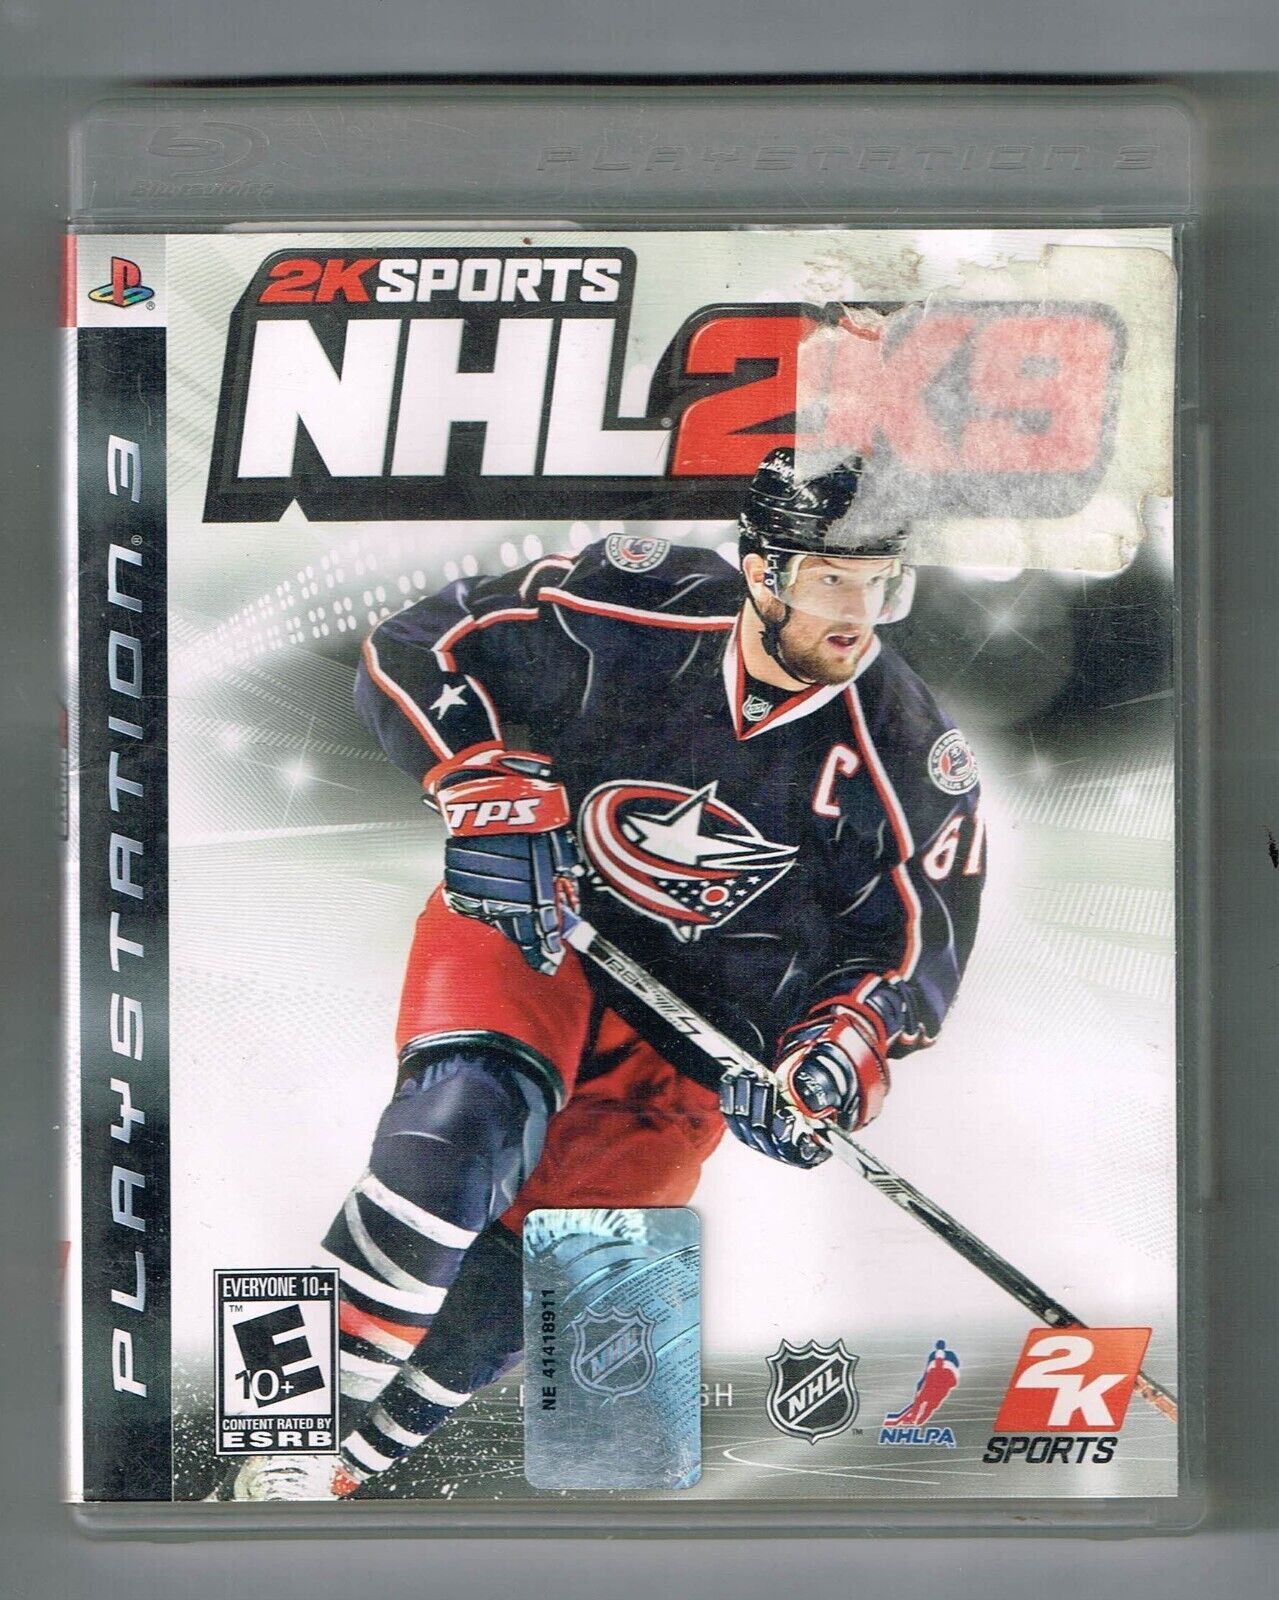 Primary image for NHL 2K9 PS3 Game PlayStation 3 CIB